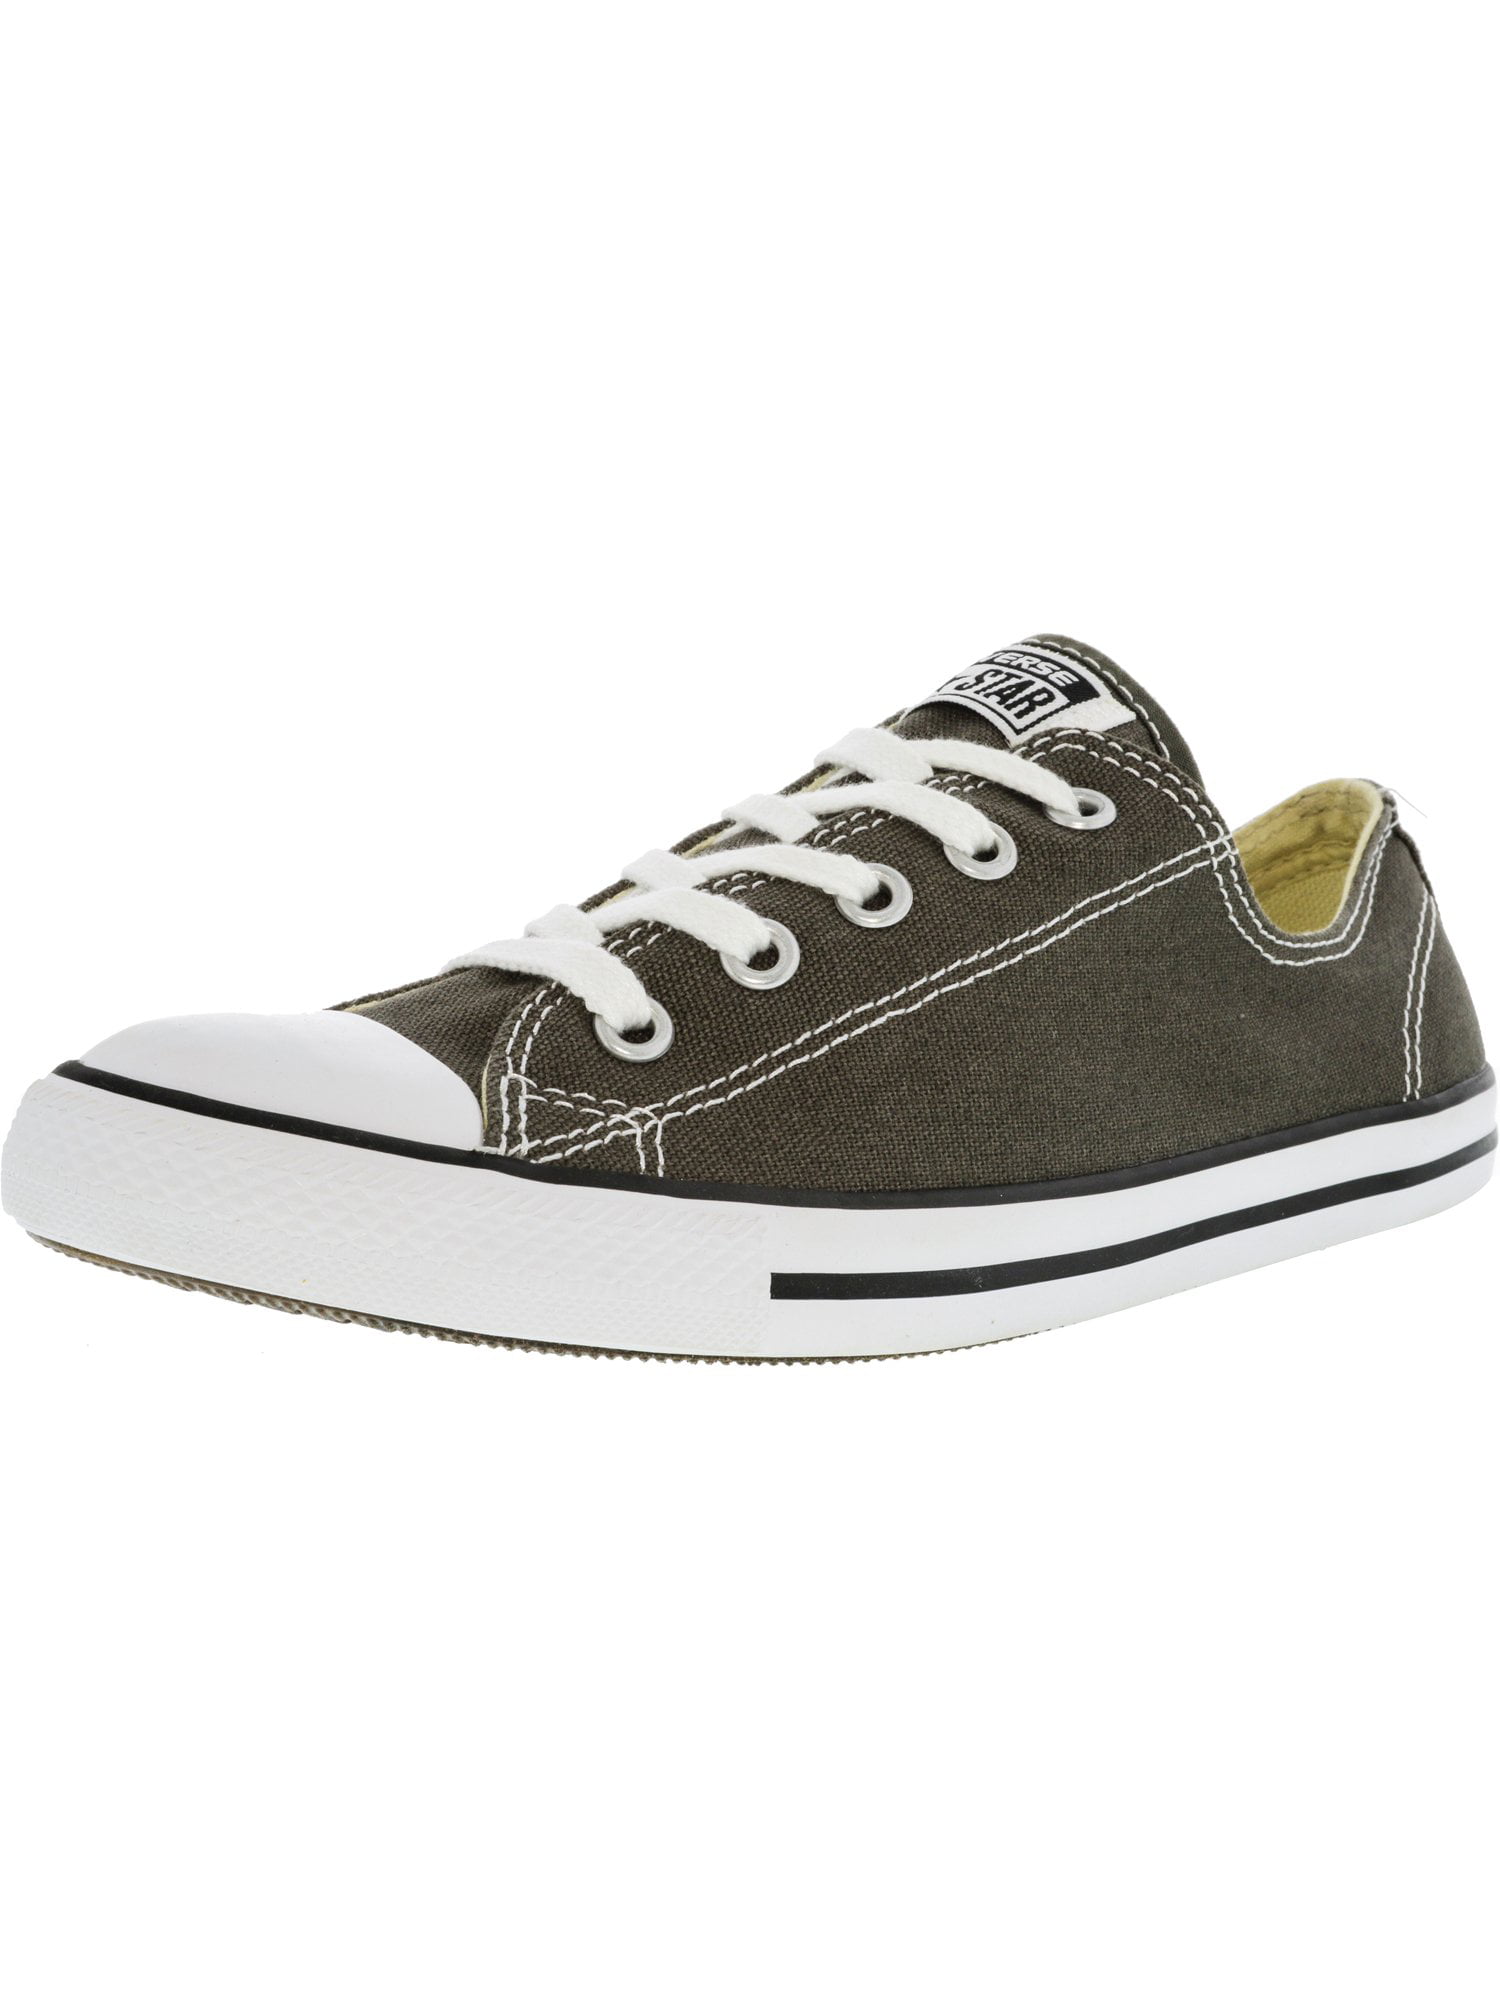 converse dainty charcoal